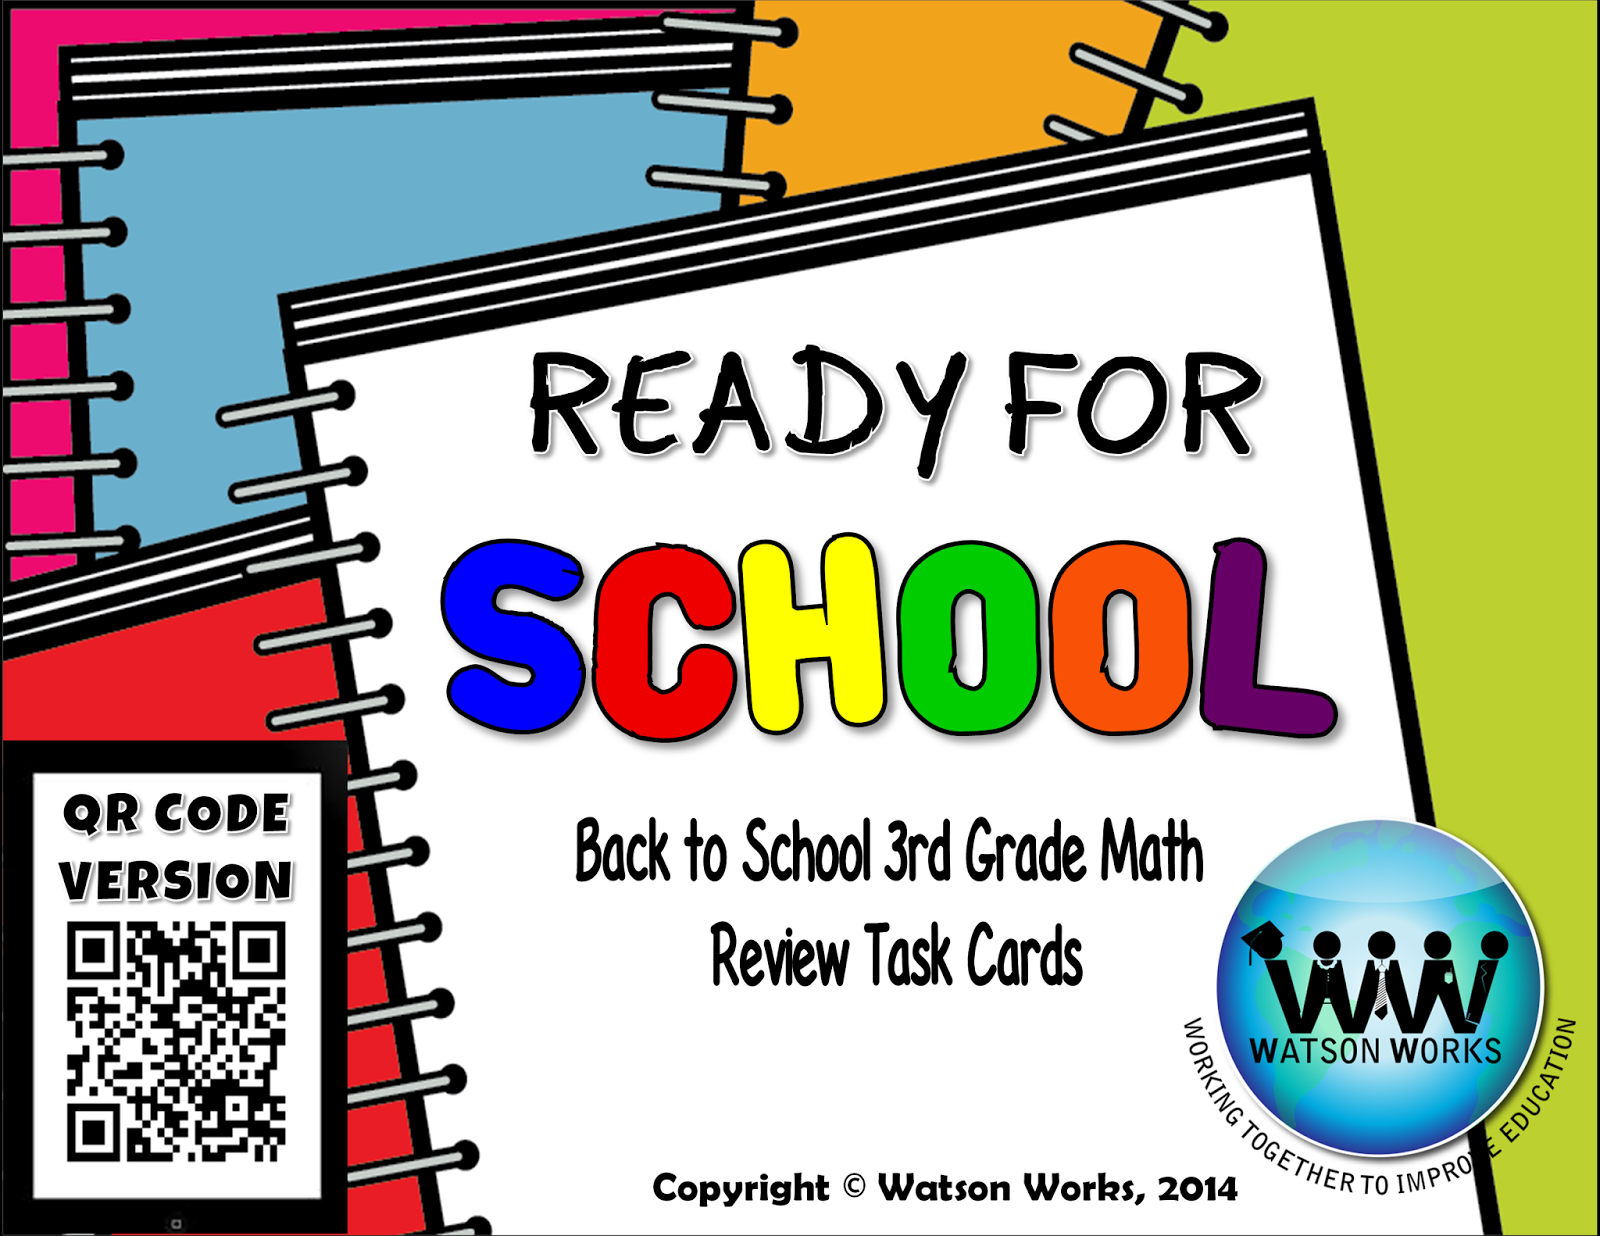 http://www.teacherspayteachers.com/Product/Ready-for-School-Back-to-School-3rd-Grade-Math-Review-Task-Cards-with-QR-Codes-1356293